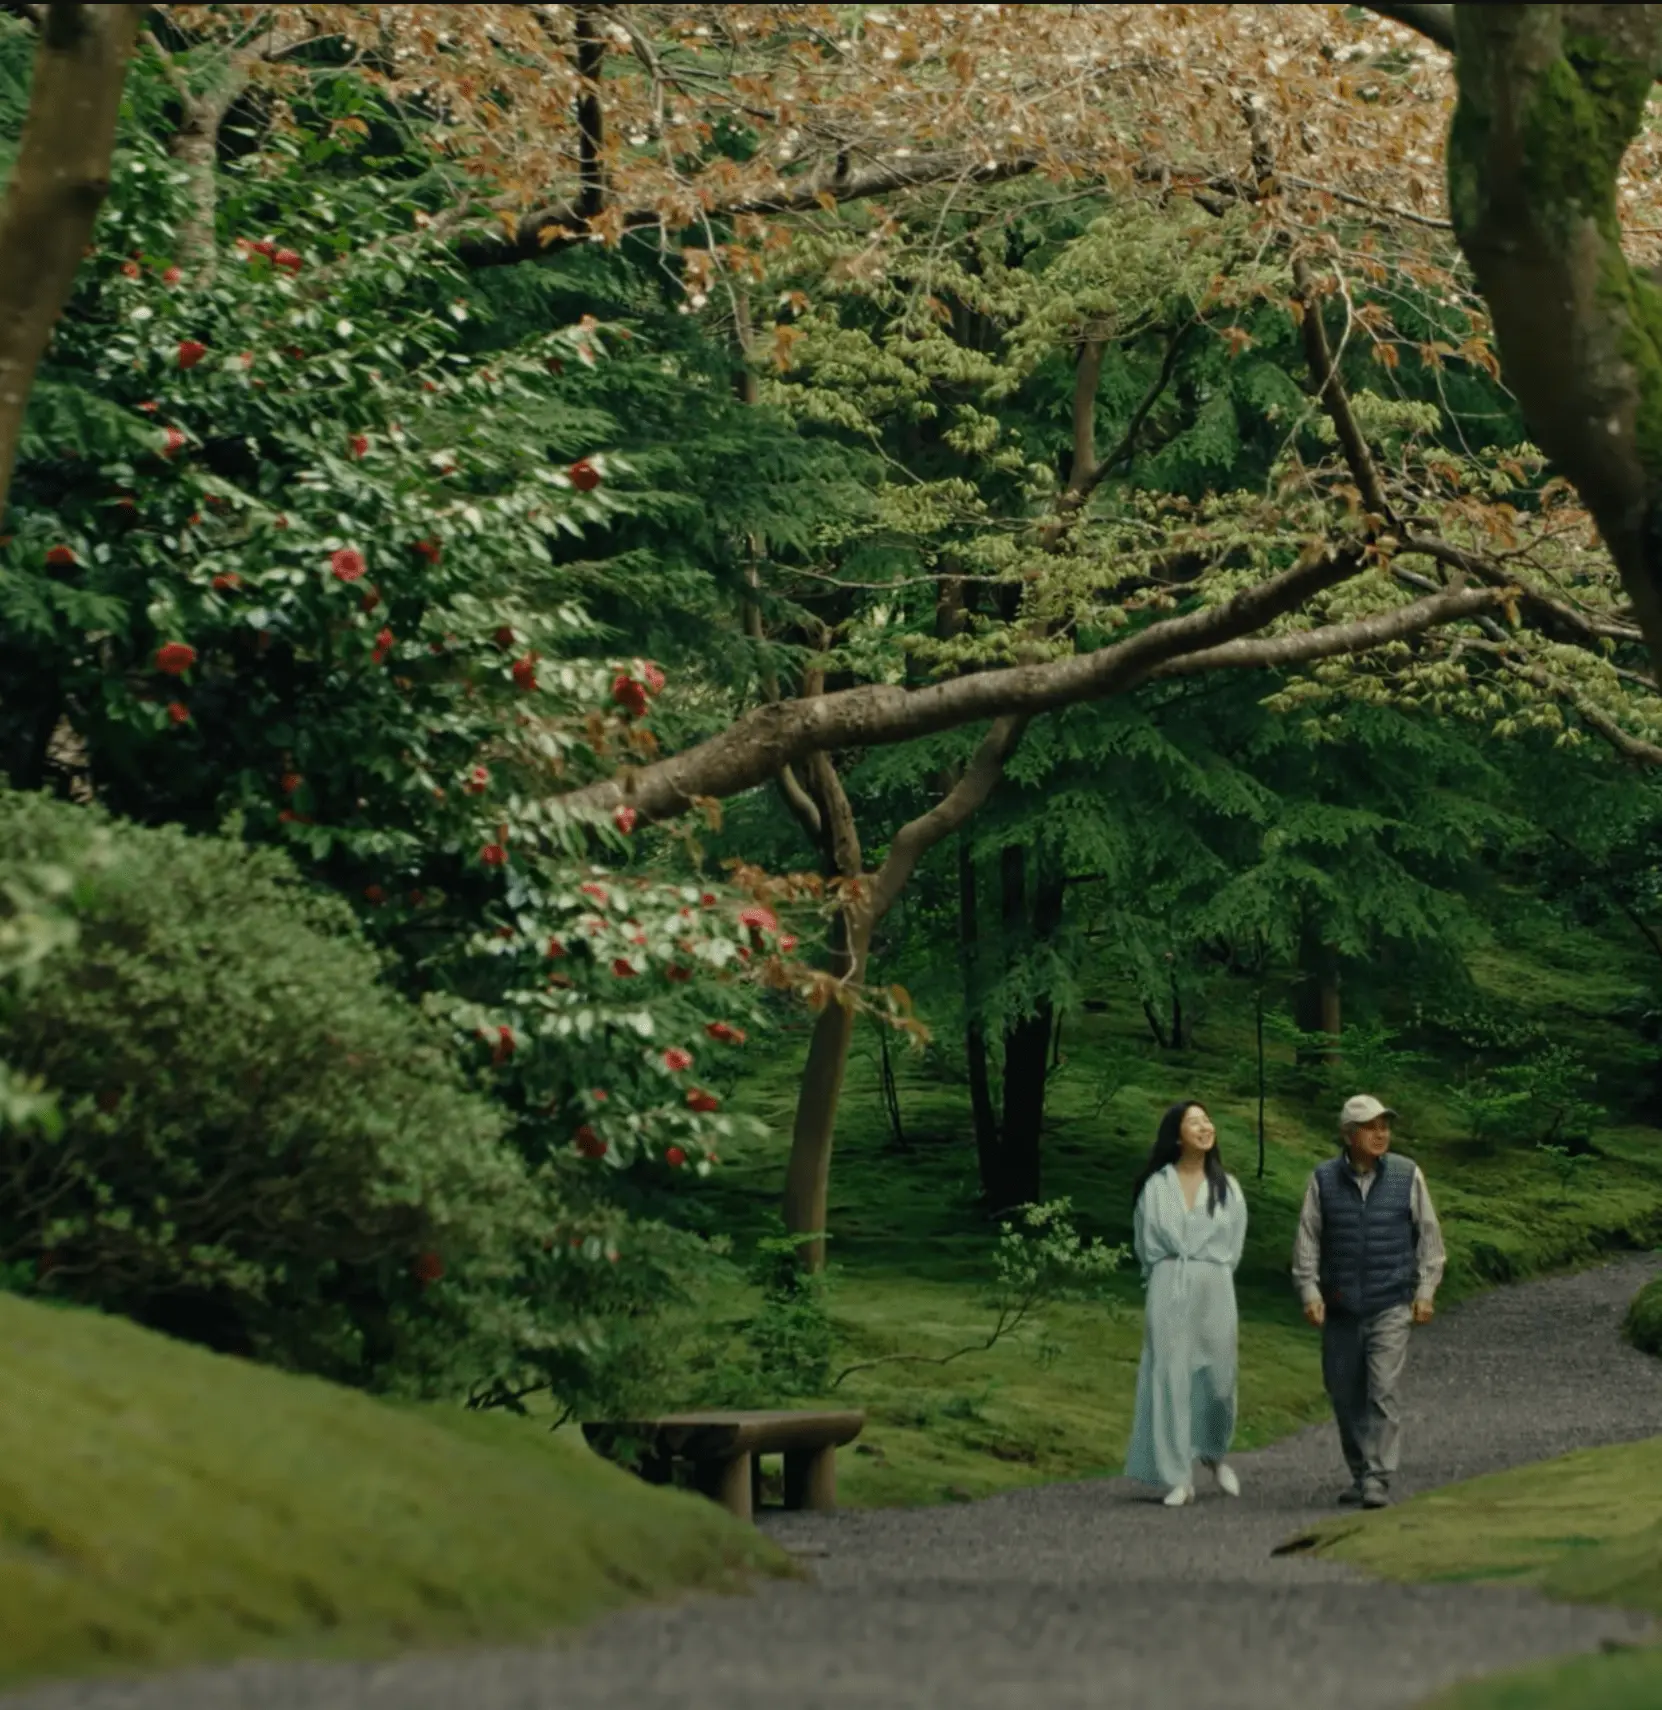 image of shizu and her father walking in a park